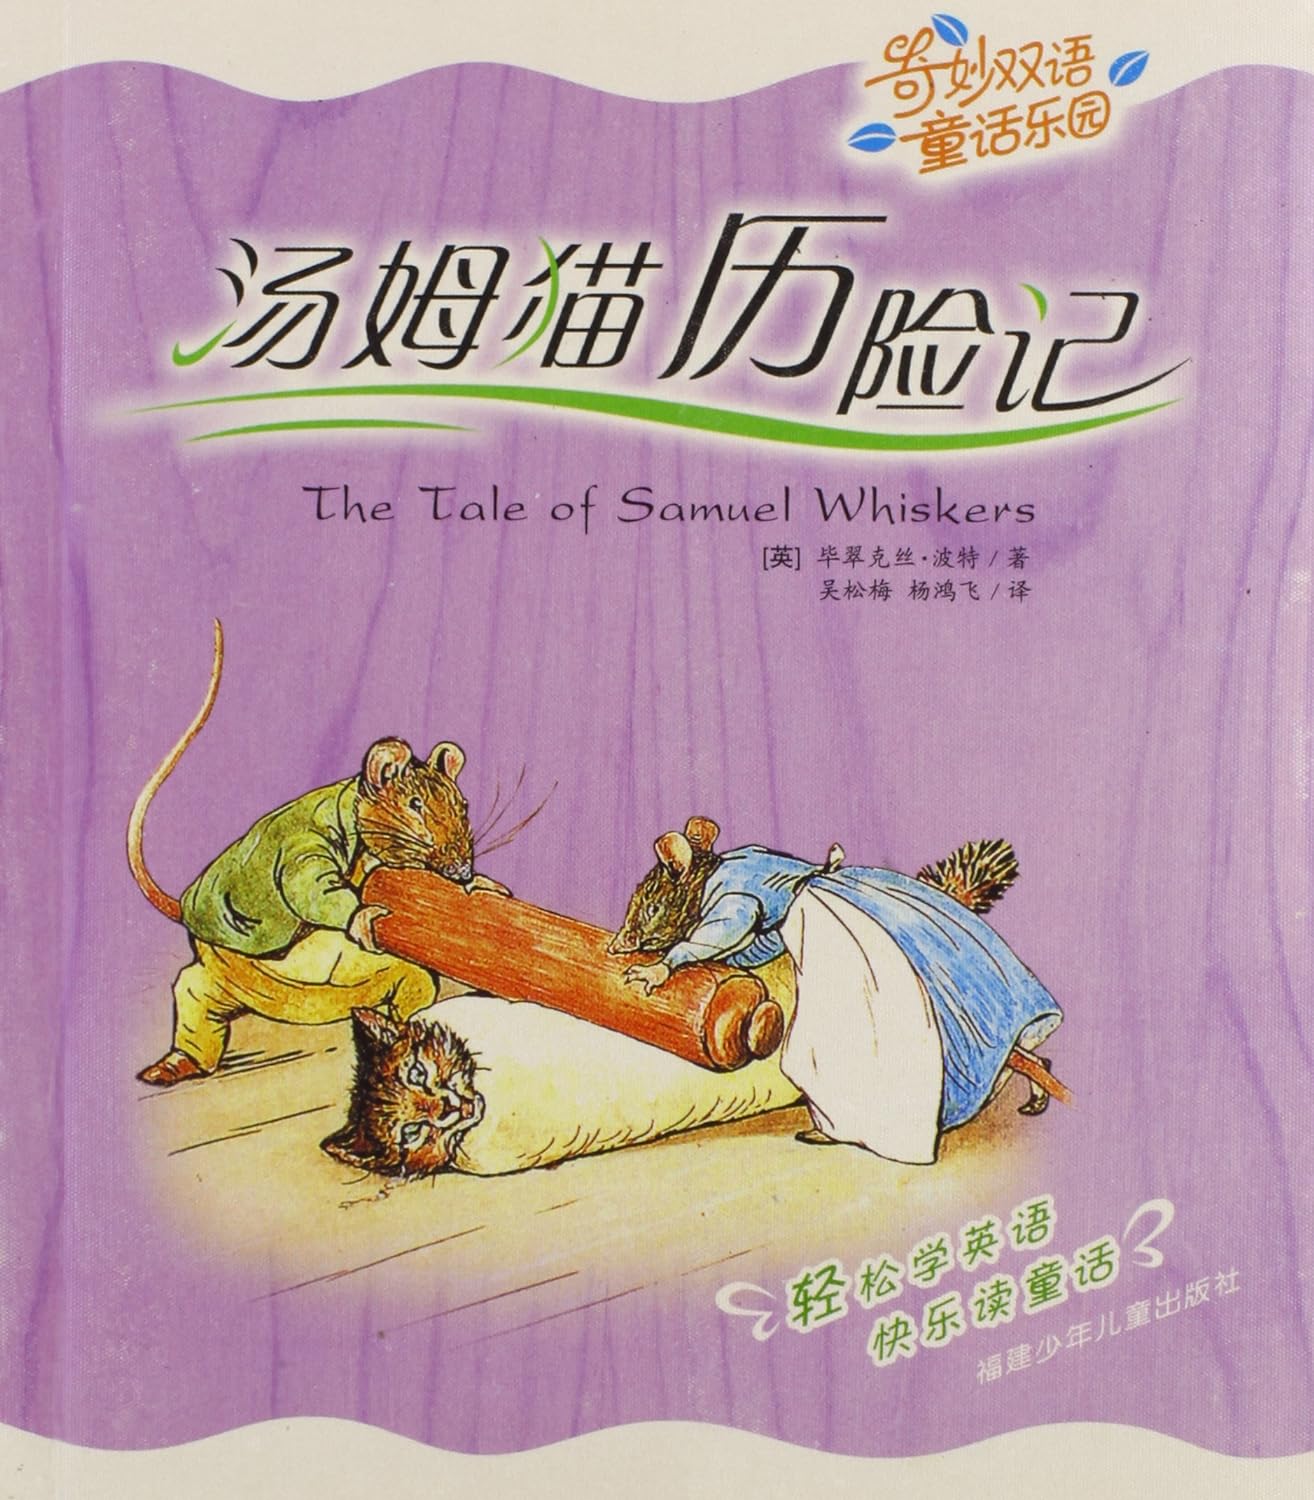 The Tale of Samuel Whiskers 汤姆猫历险记 奇妙双语童话乐园 (English and Chinese Edition)